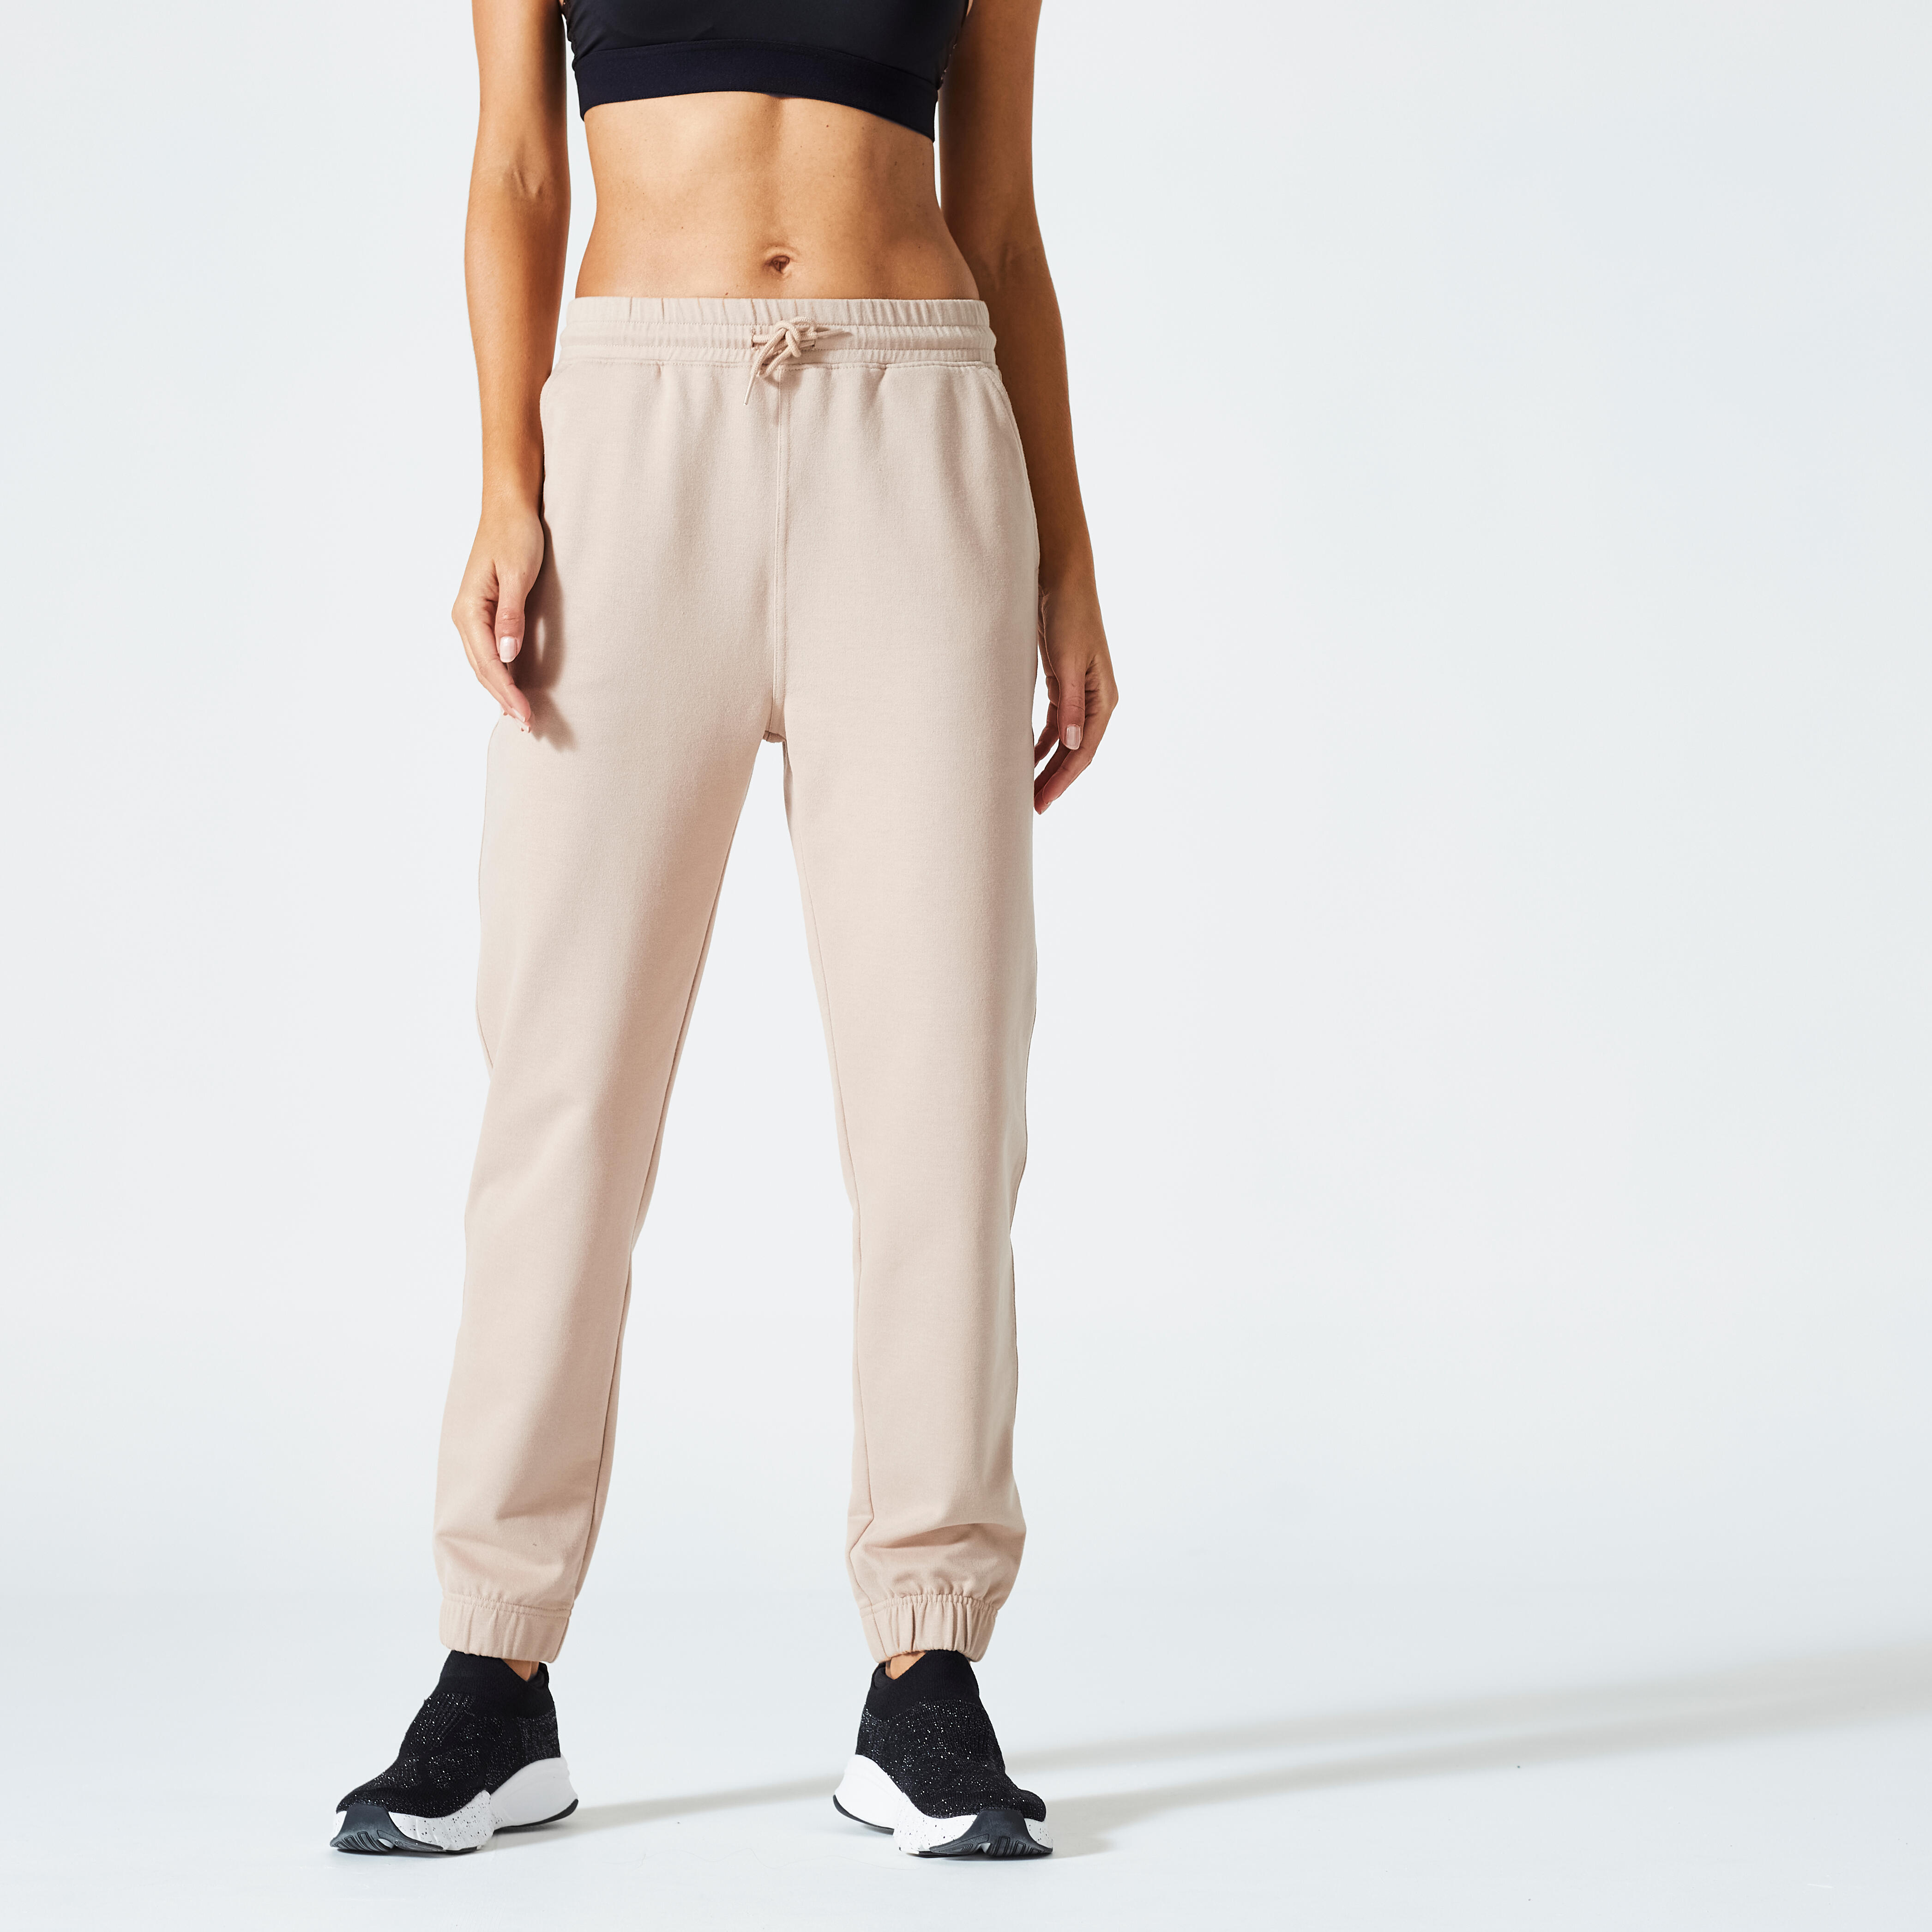 Women's Trackpant Jogger 500 For Gym - Powder Grey